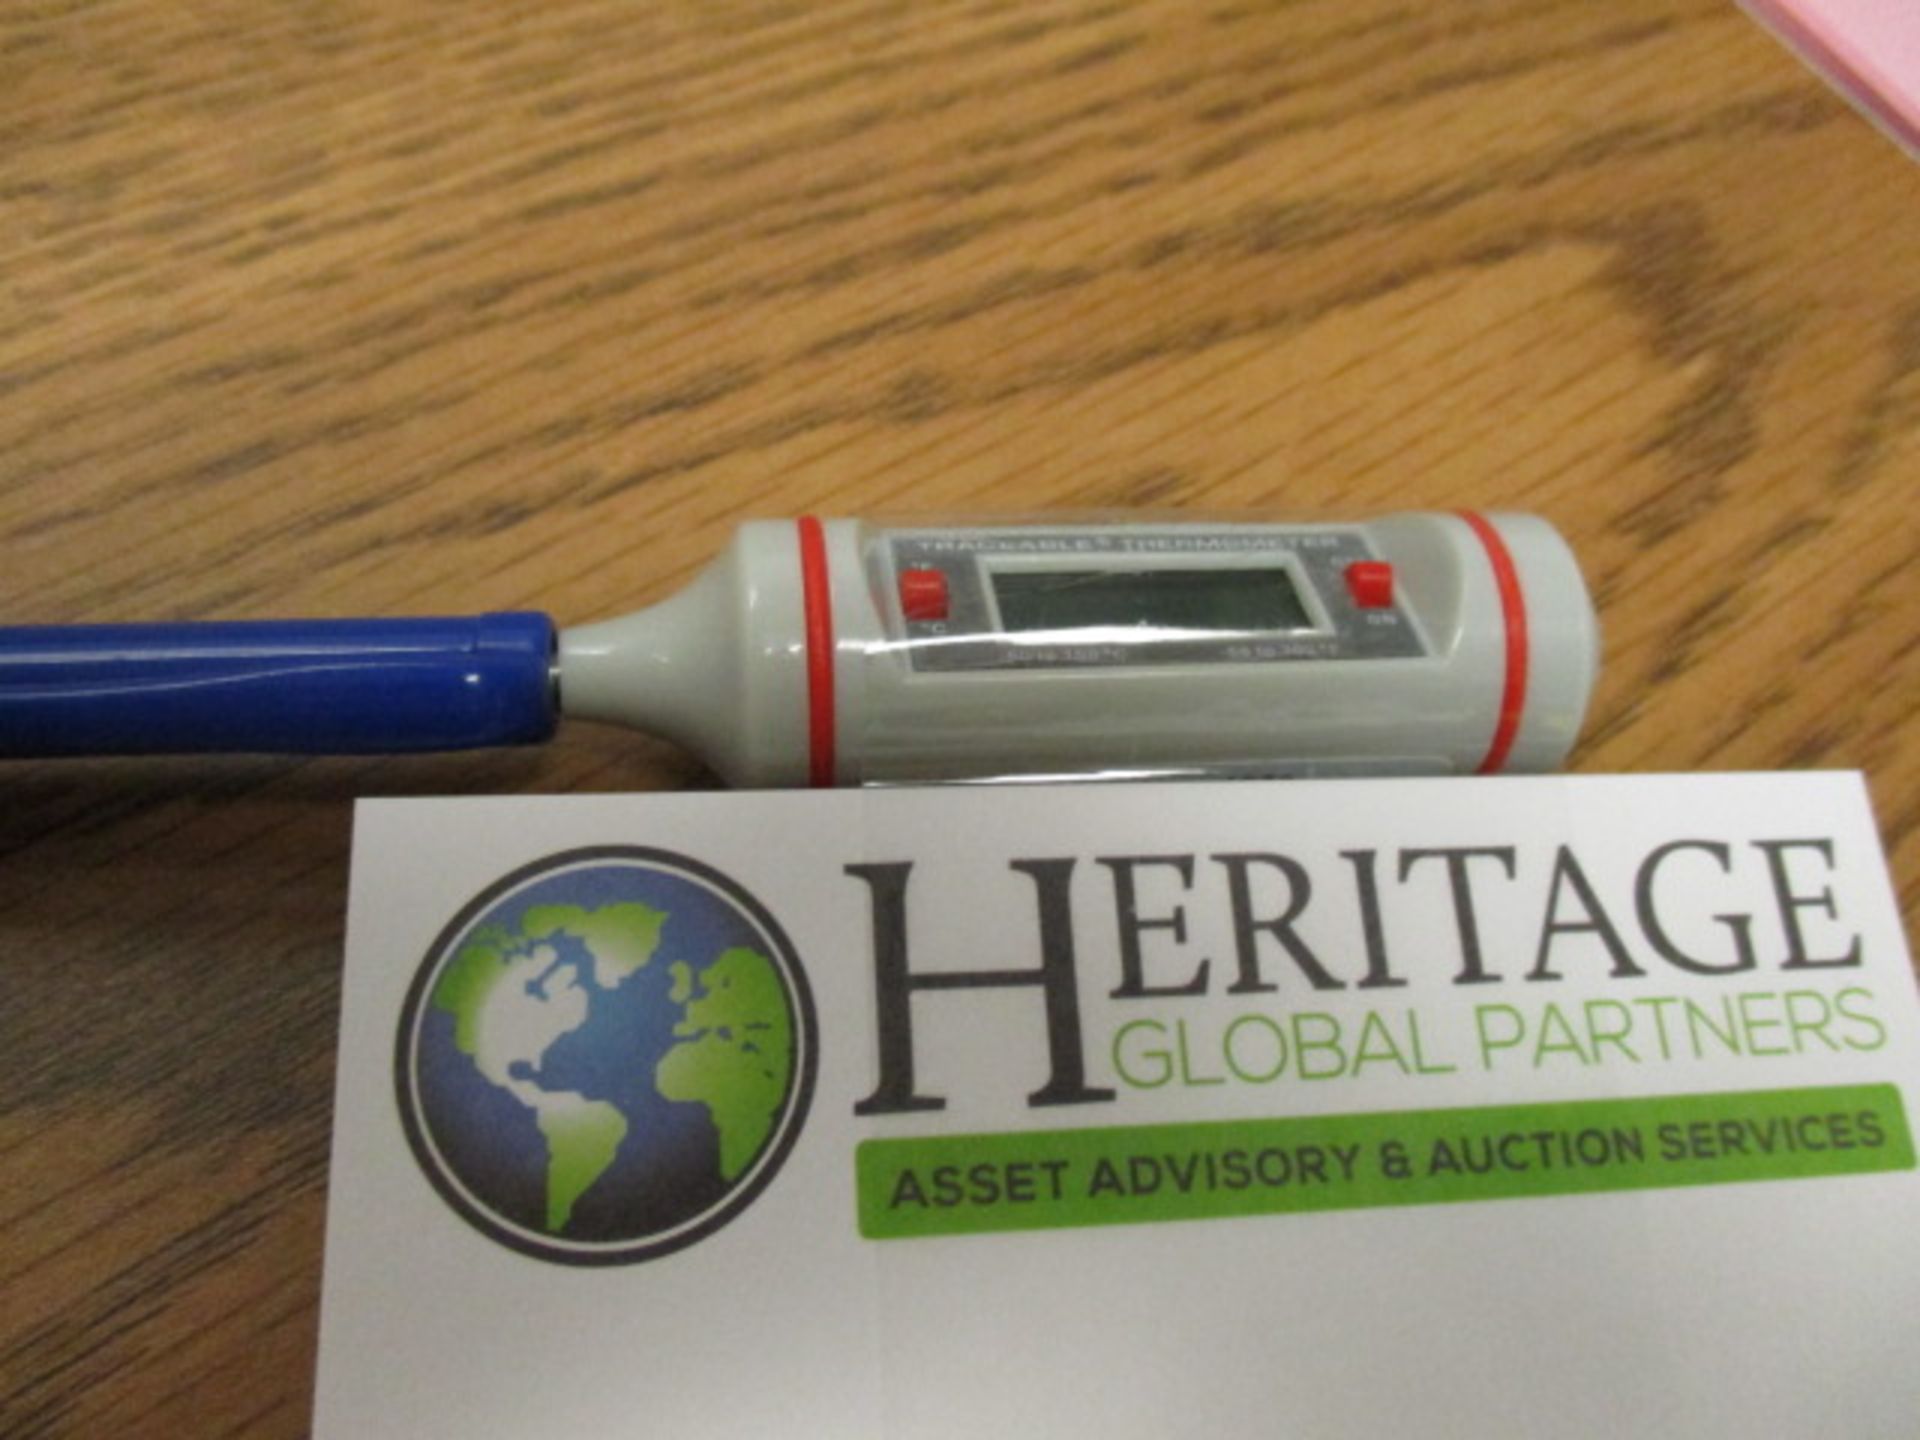 Control Company 4052 Traceable Thermometer. LOC: Area-4. Asset Located At Clarity Medical Systems, - Bild 2 aus 2